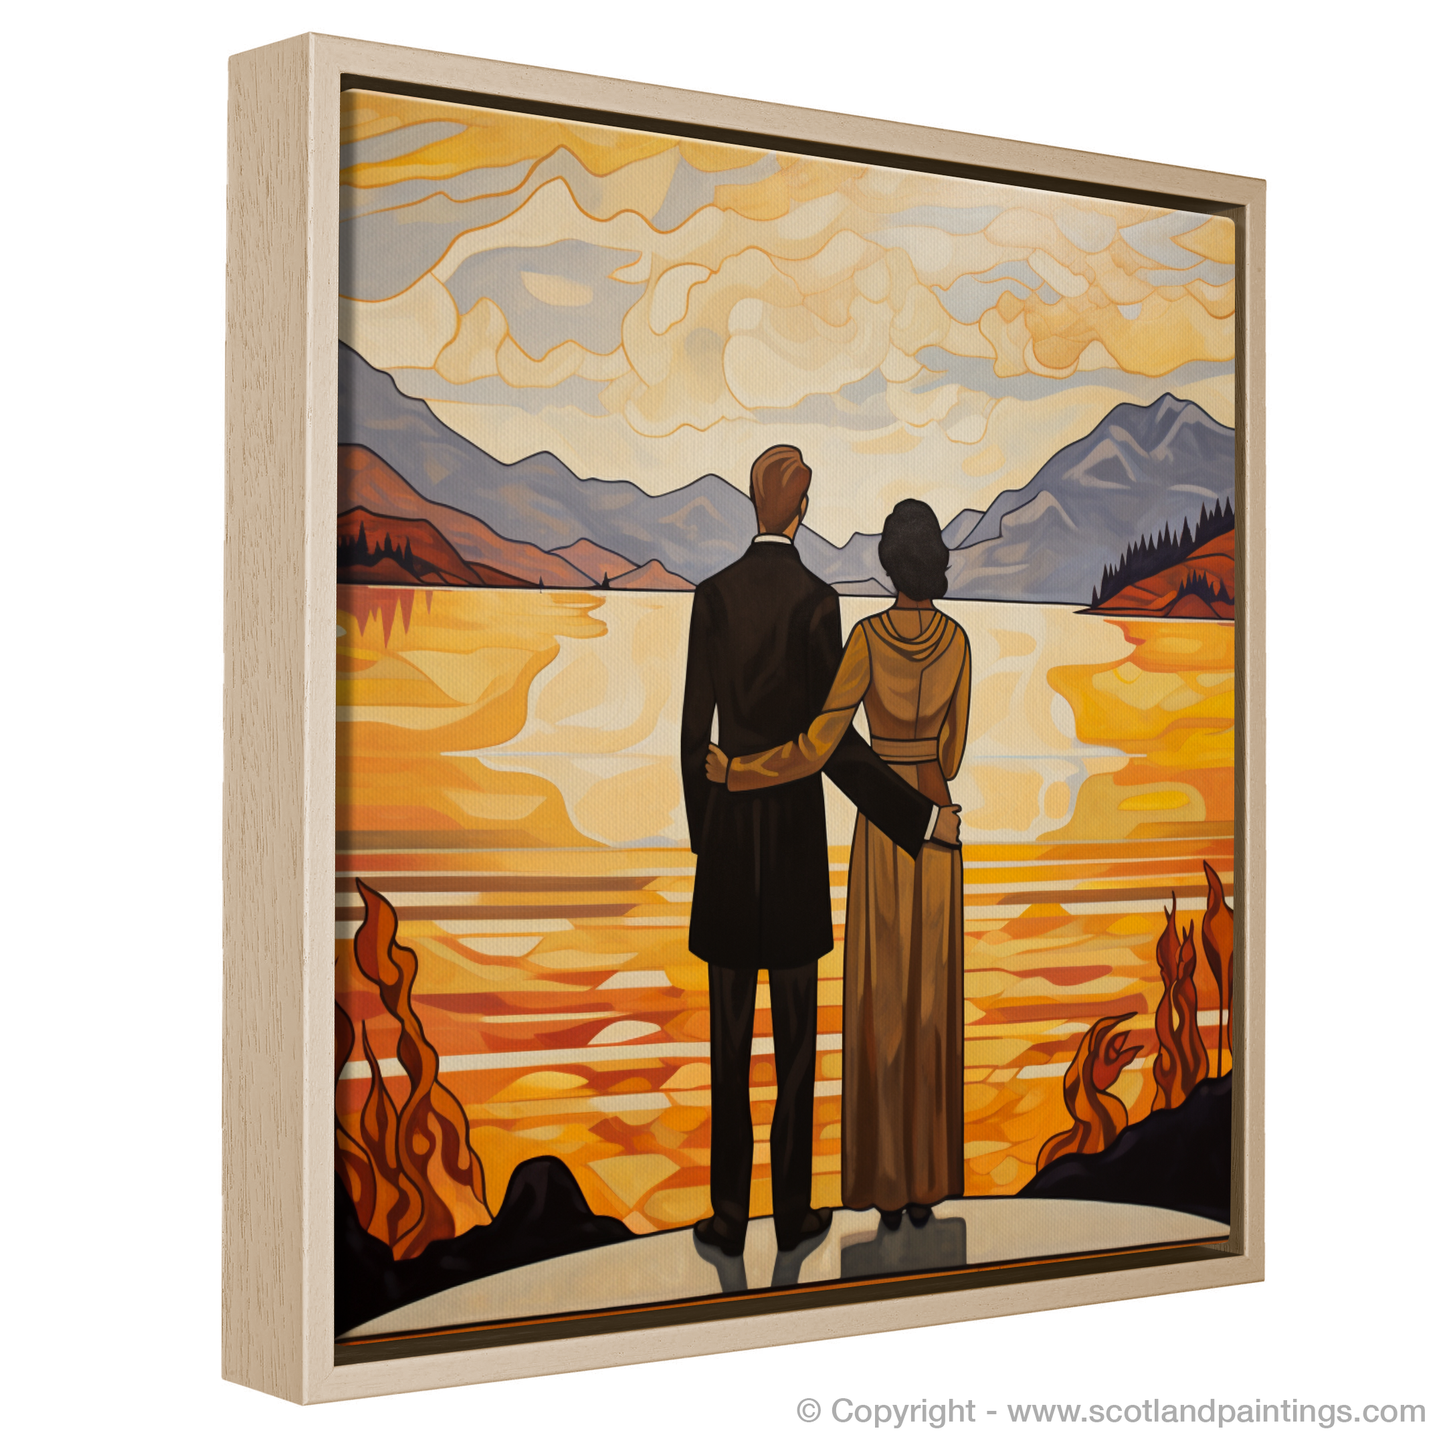 Painting and Art Print of A couple holding hands looking out on Loch Lomond entitled "Twilight Embrace by Loch Lomond".